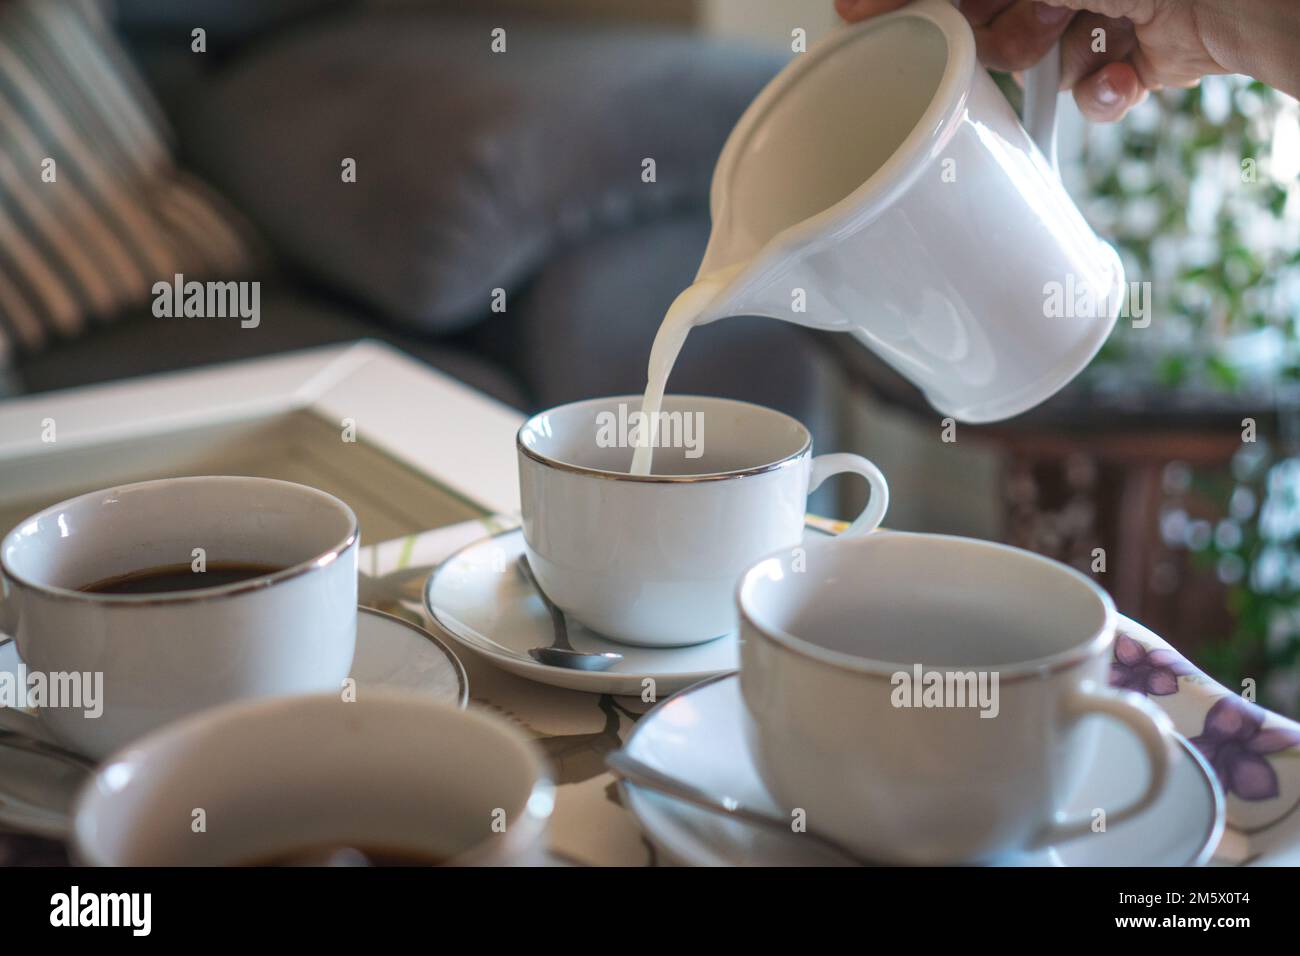 The close-up view of a pitcher pouring milk into white coffee cups Stock Photo